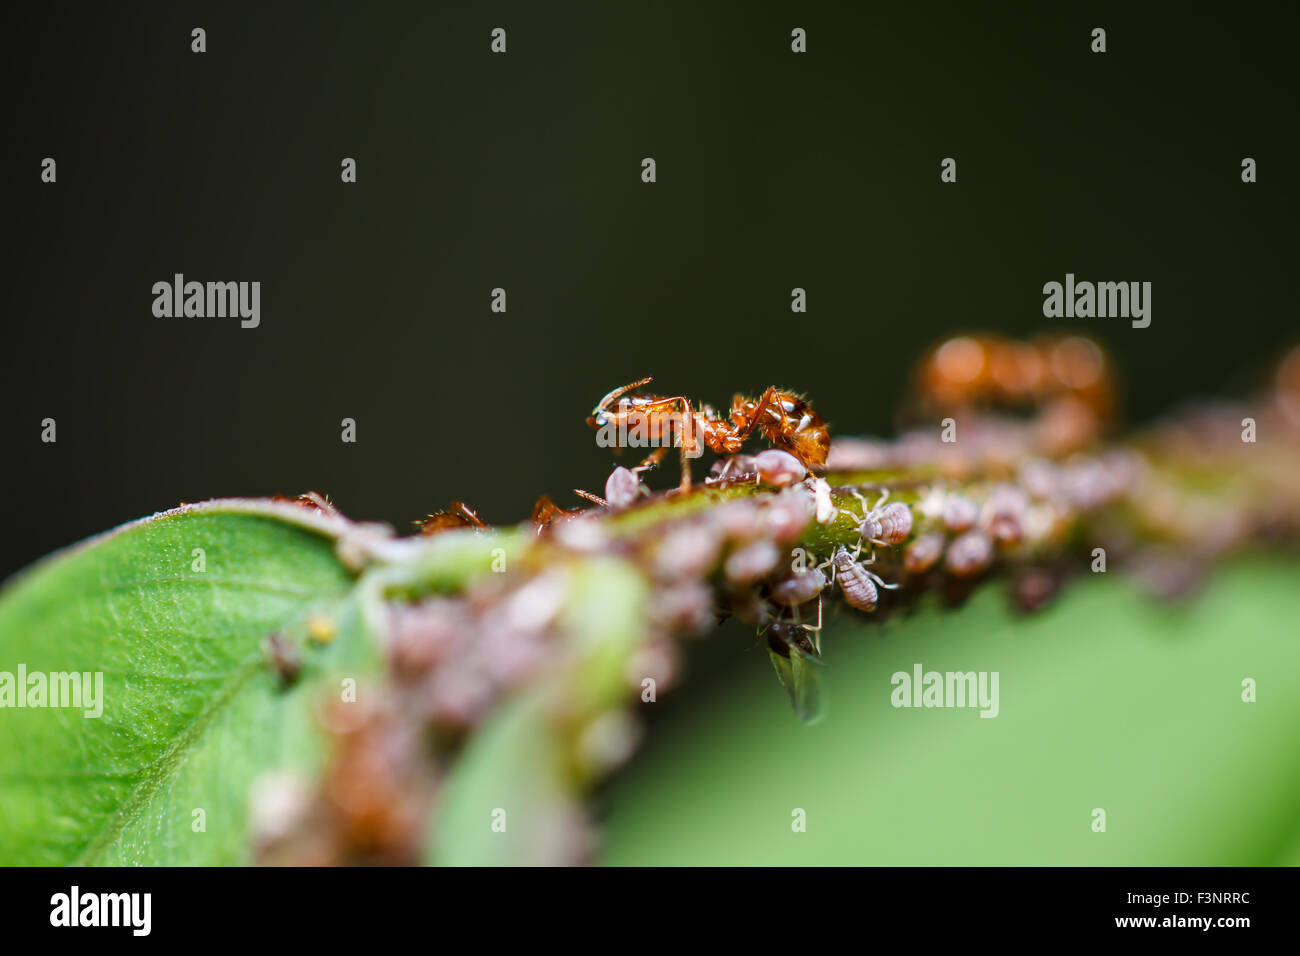 red ants on a green leaf Stock Photo